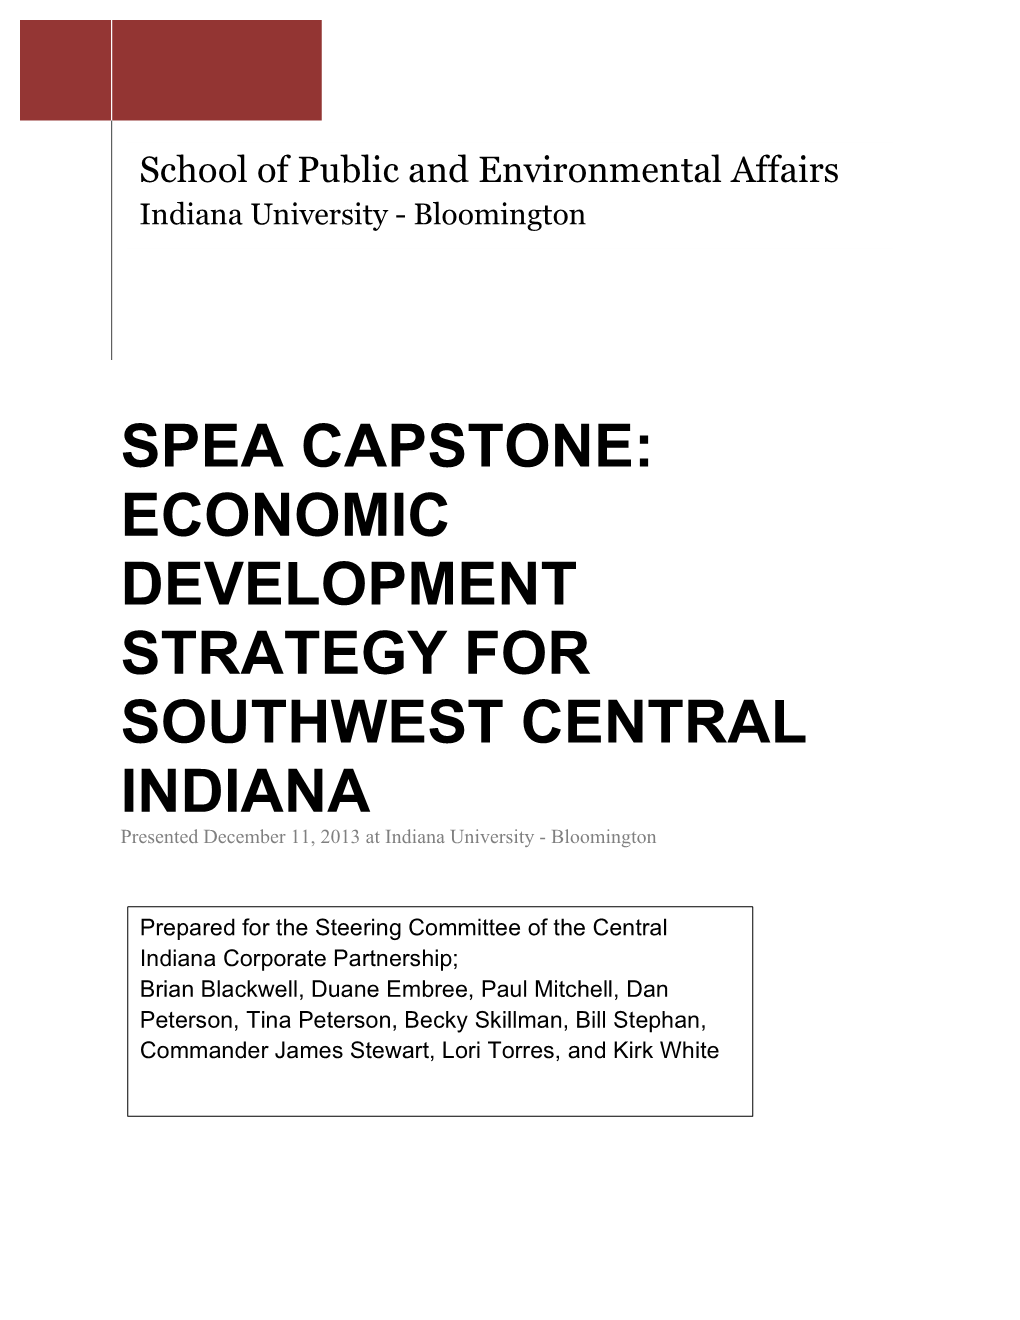 ECONOMIC DEVELOPMENT STRATEGY for SOUTHWEST CENTRAL INDIANA Presented December 11, 2013 at Indiana University - Bloomington